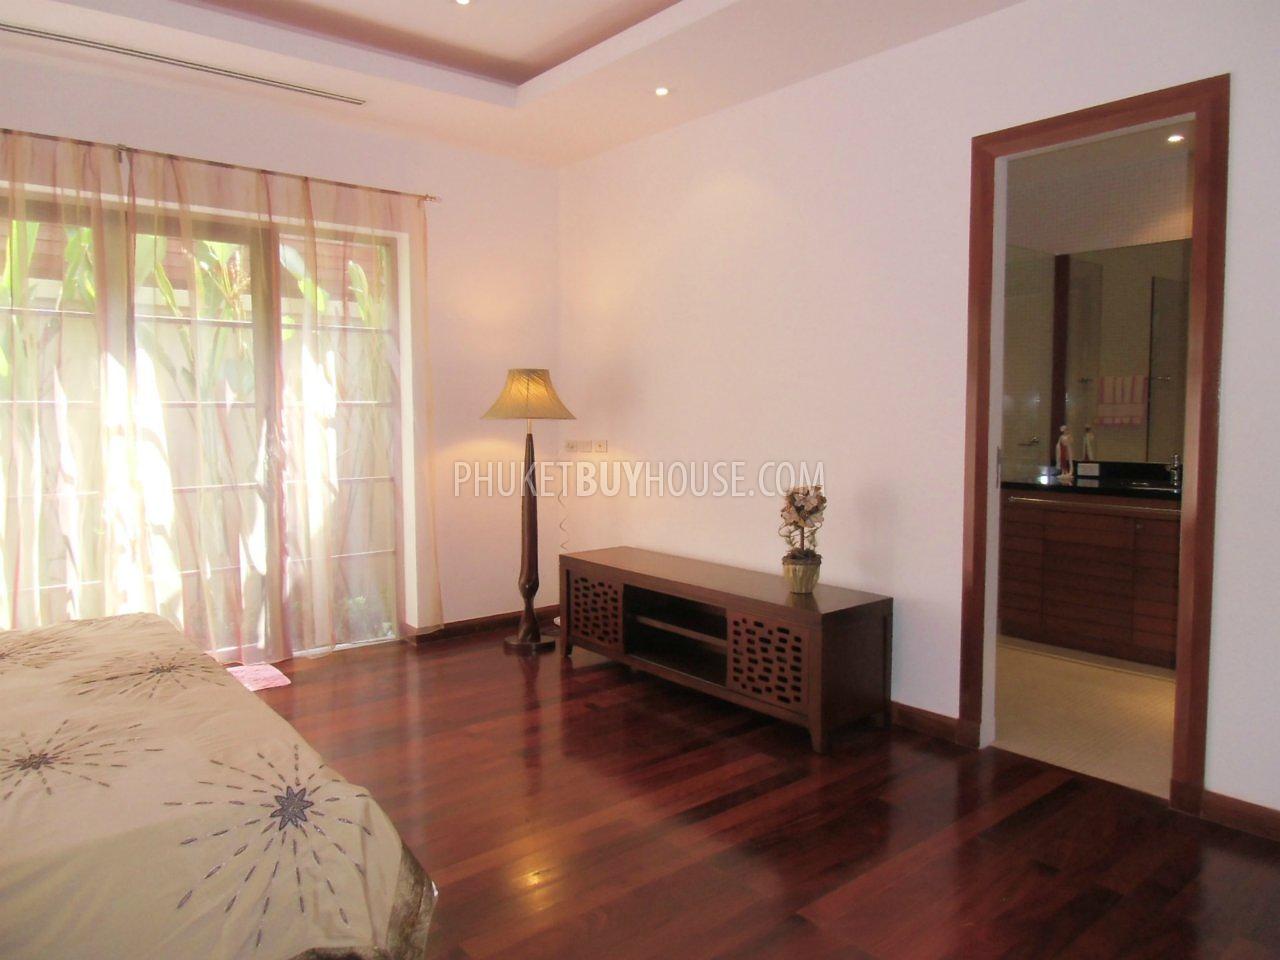 BAN2907: Lovely Villa with 3 Bedroom in walking distance from the Bang Tao beach. Photo #3